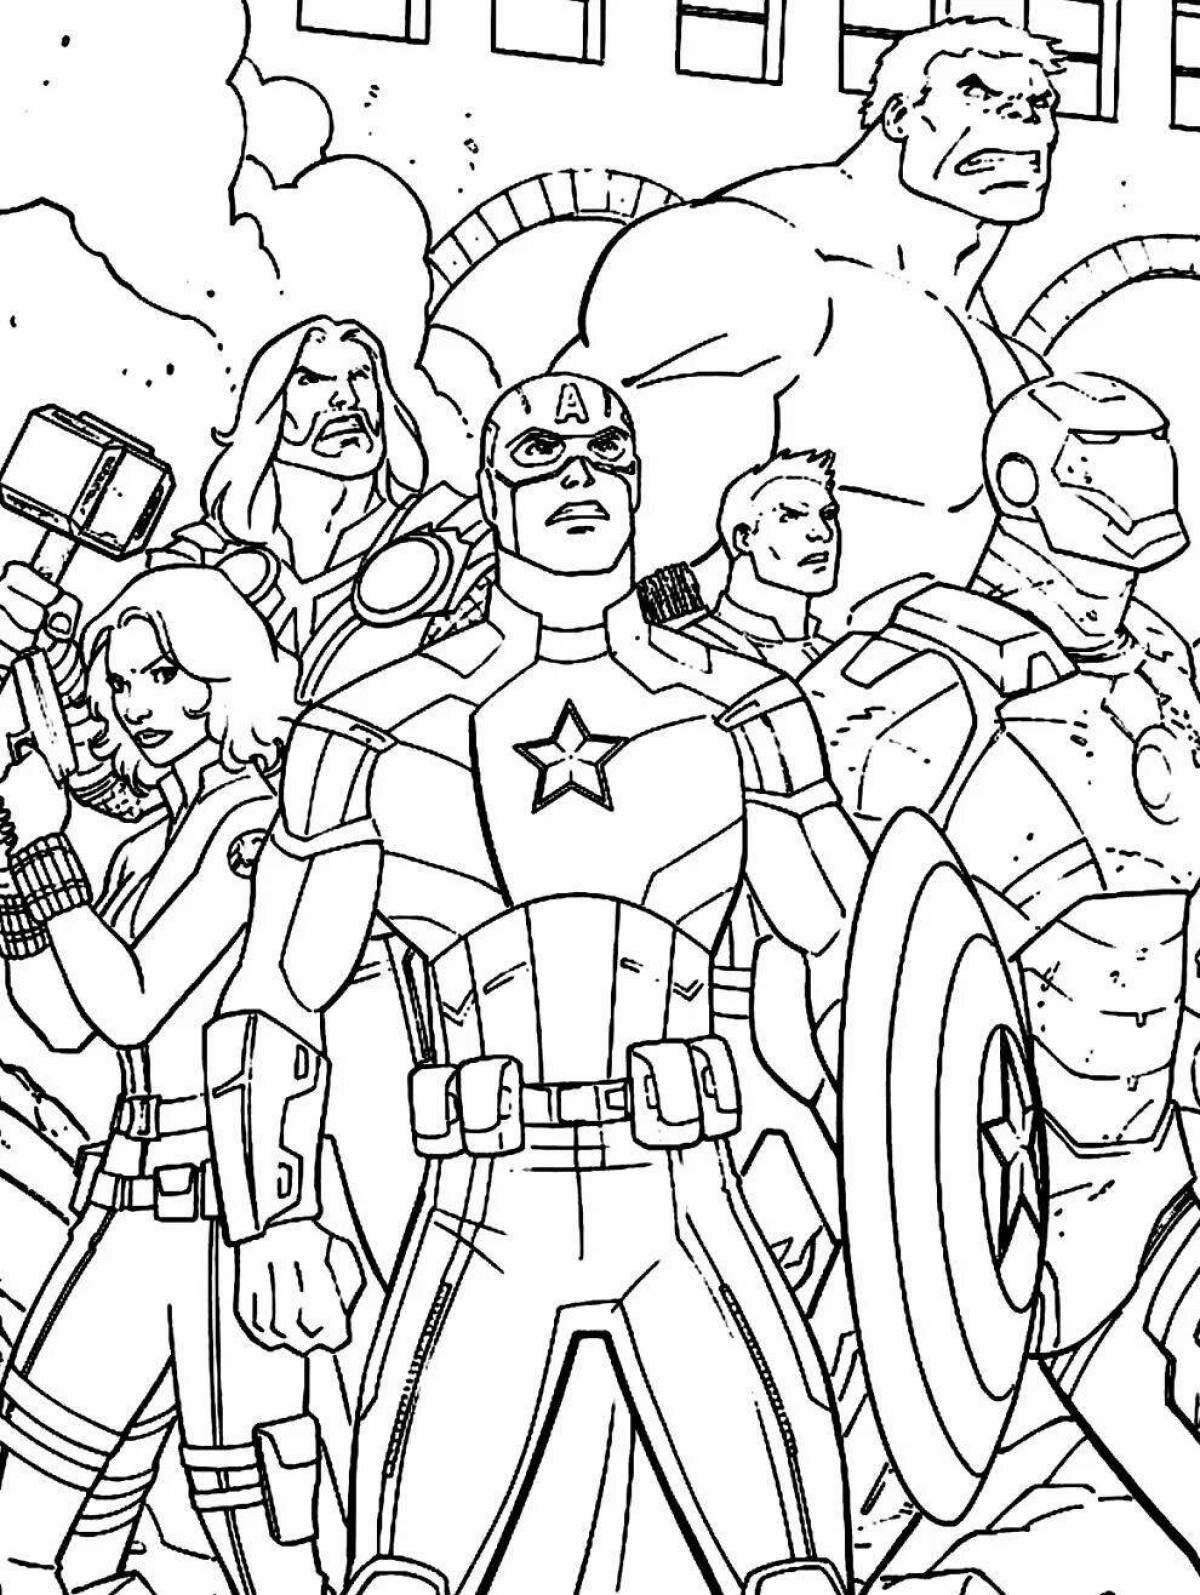 Amazing avengers coloring book